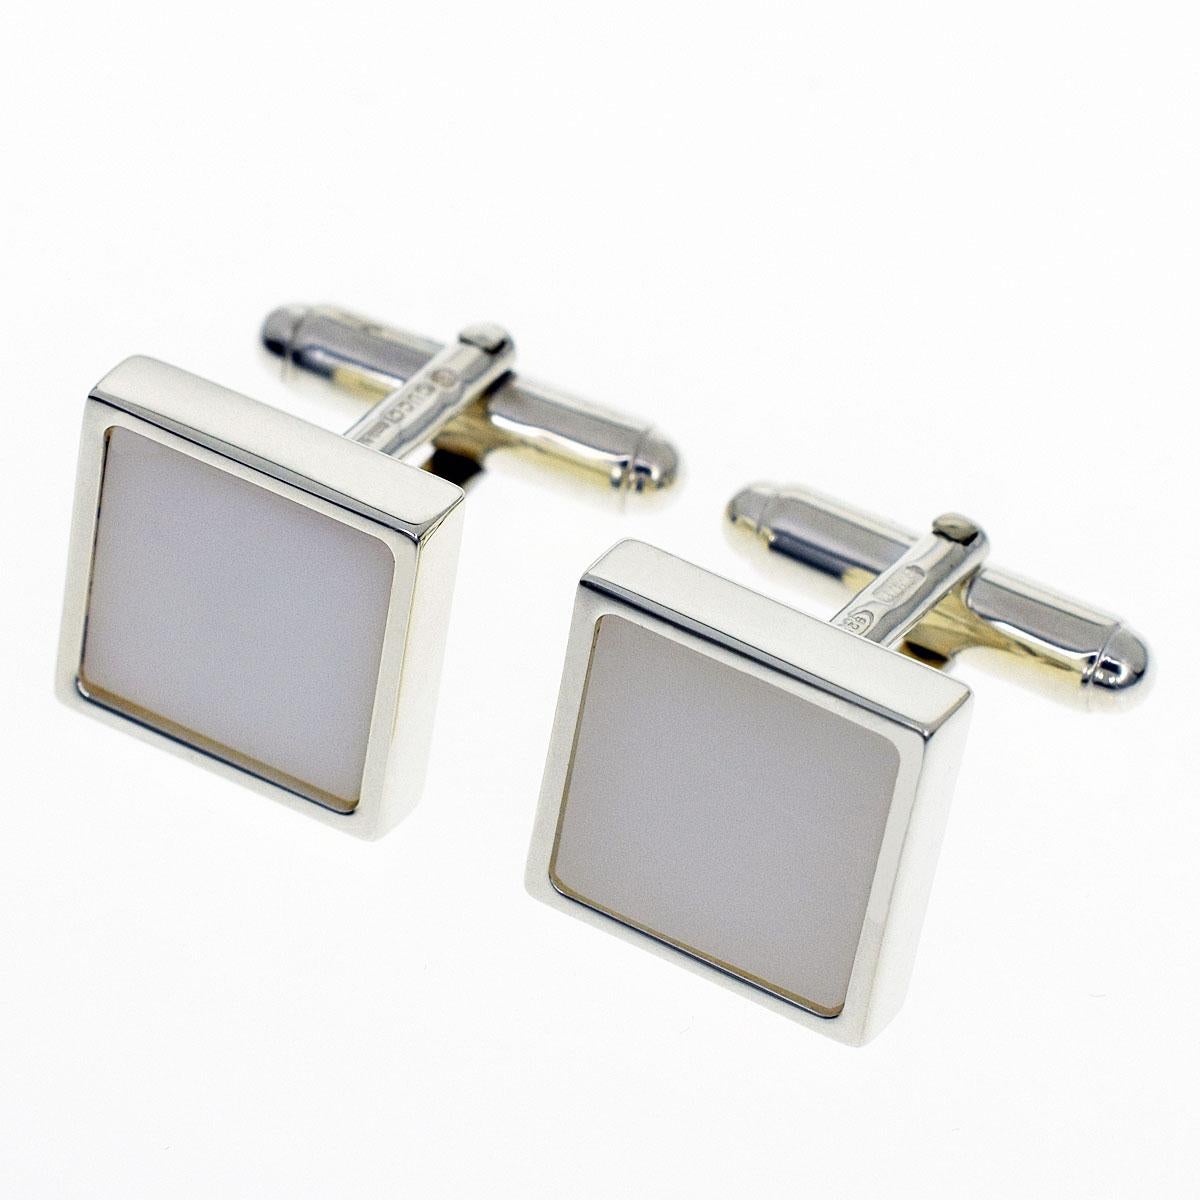 Brand:GUCCI
Name:White x silver color cufflinks
Material:Sterling Silver
Weight :13.5g(Pair）(Approx)
Top size:H14.82mm×W14.92mm / H0.58in×W0.58un(Approx)
Comes with:Gucci case